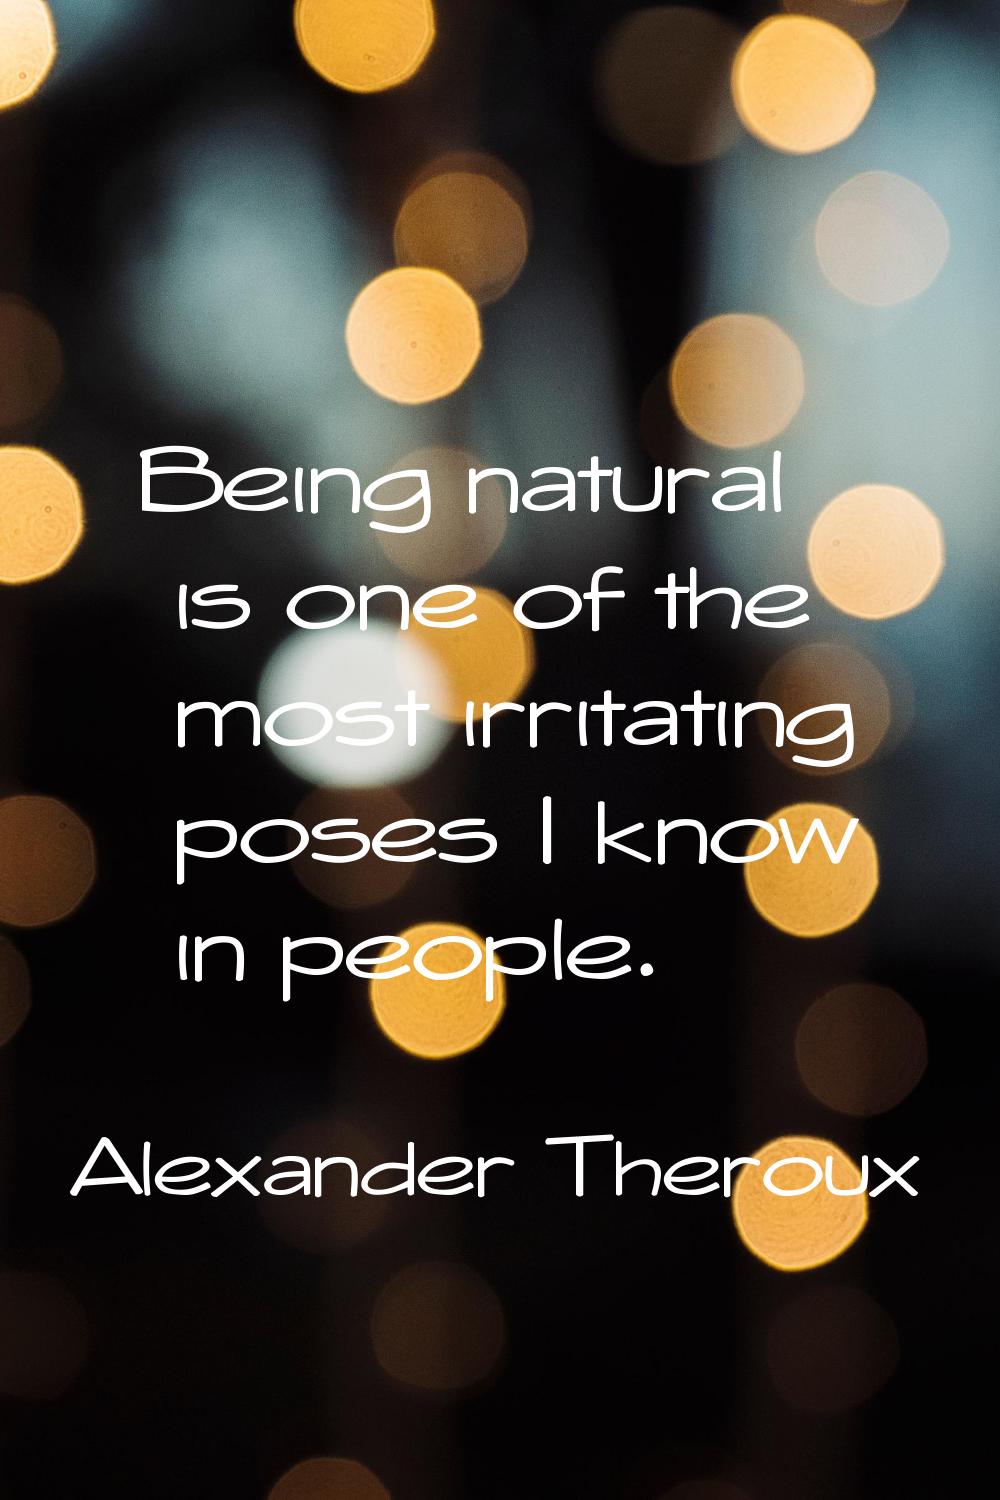 Being natural is one of the most irritating poses I know in people.